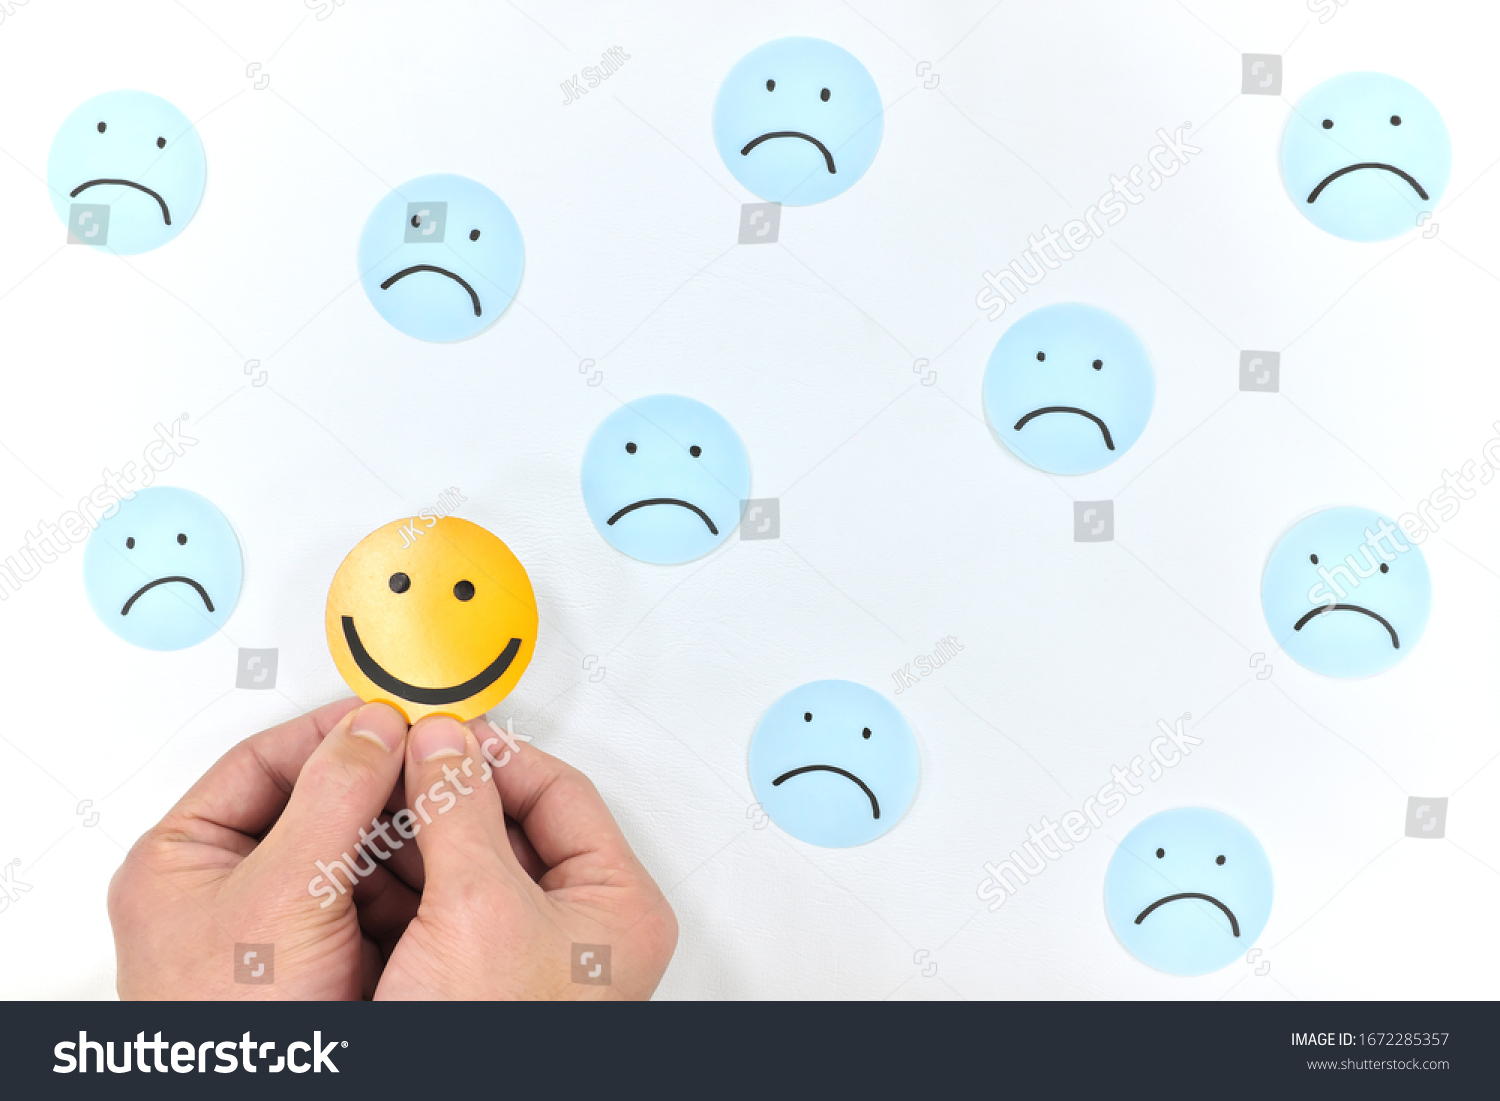 A smiling face icon among a group of sad emoticons in white background. Be positive and stay happy concept. #1672285357